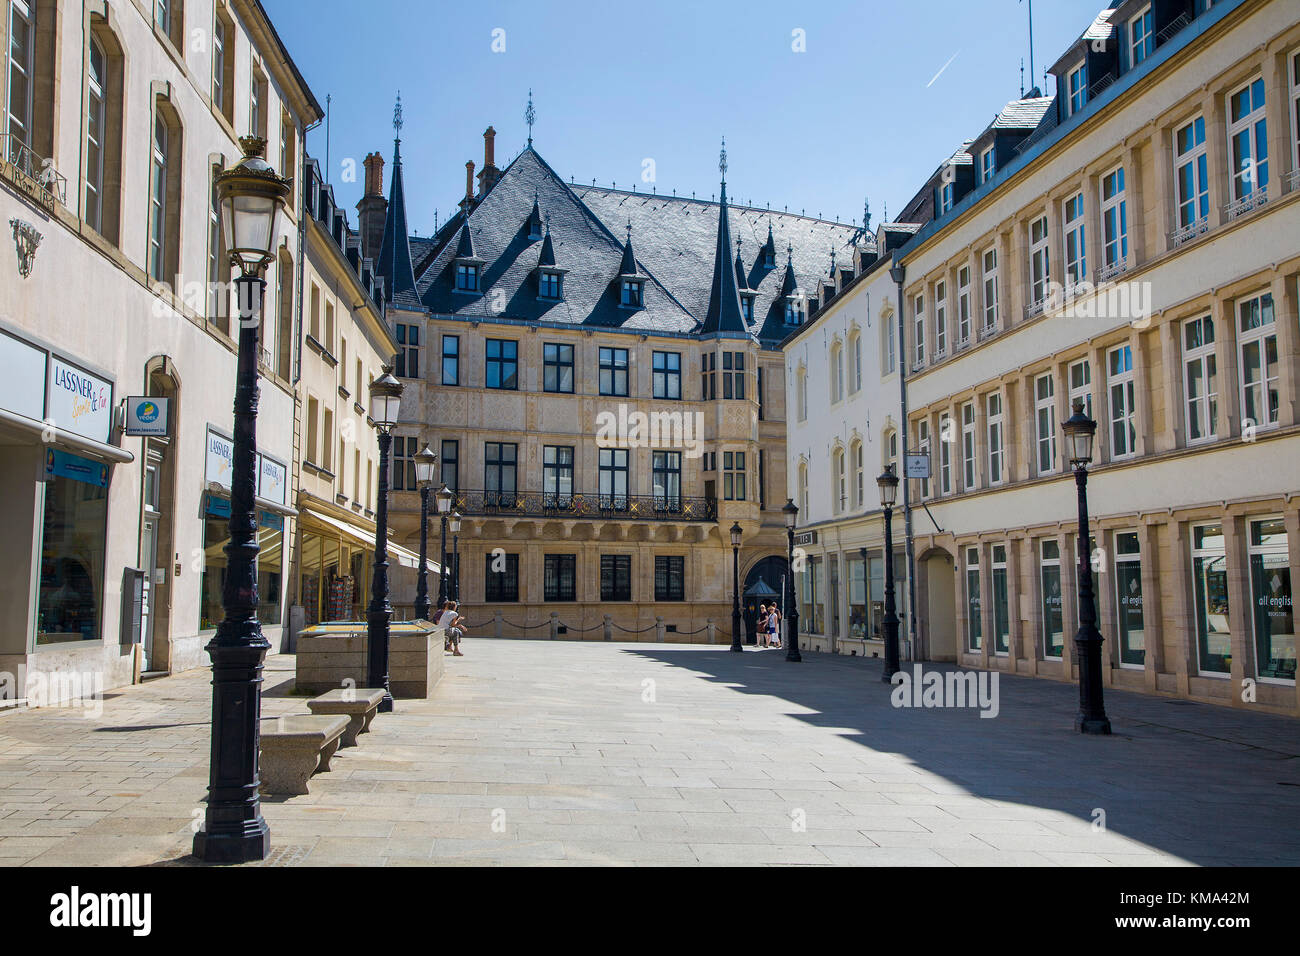 View on Grand ducal palace,Luxembourg-city, Luxembourg, Europe Stock Photo